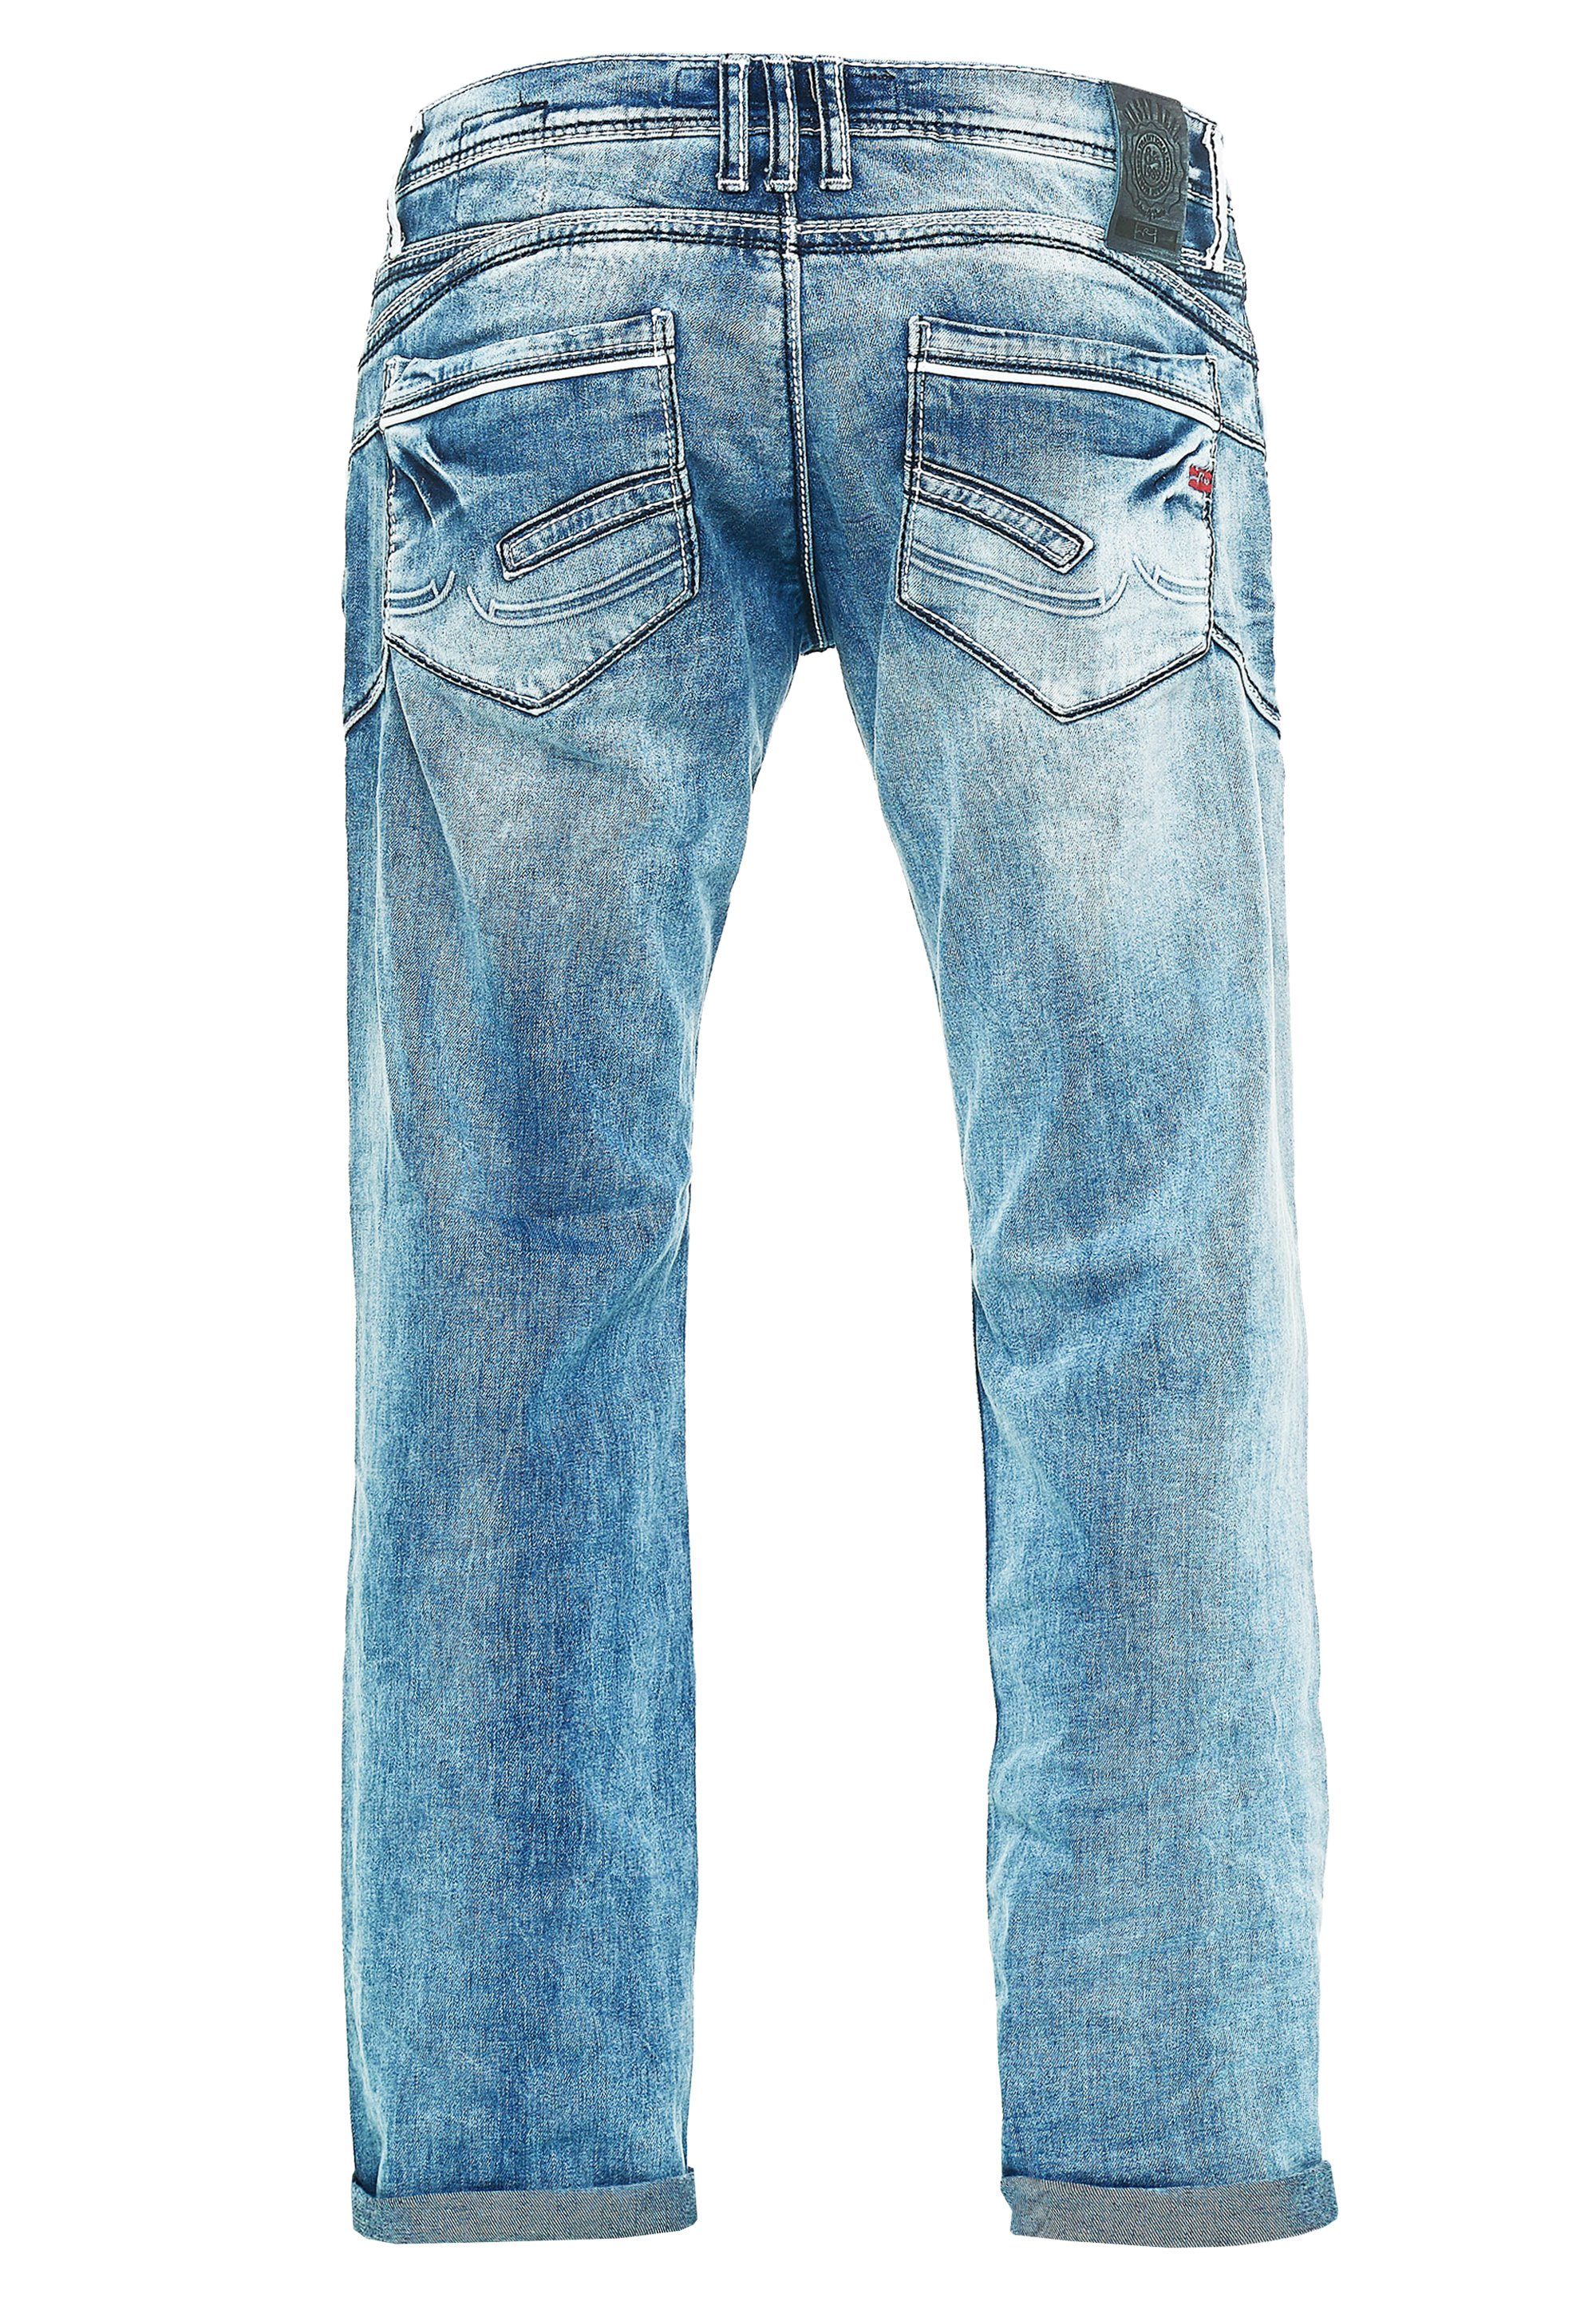 Rusty Neal Bequeme Jeans mit Waschung cooler